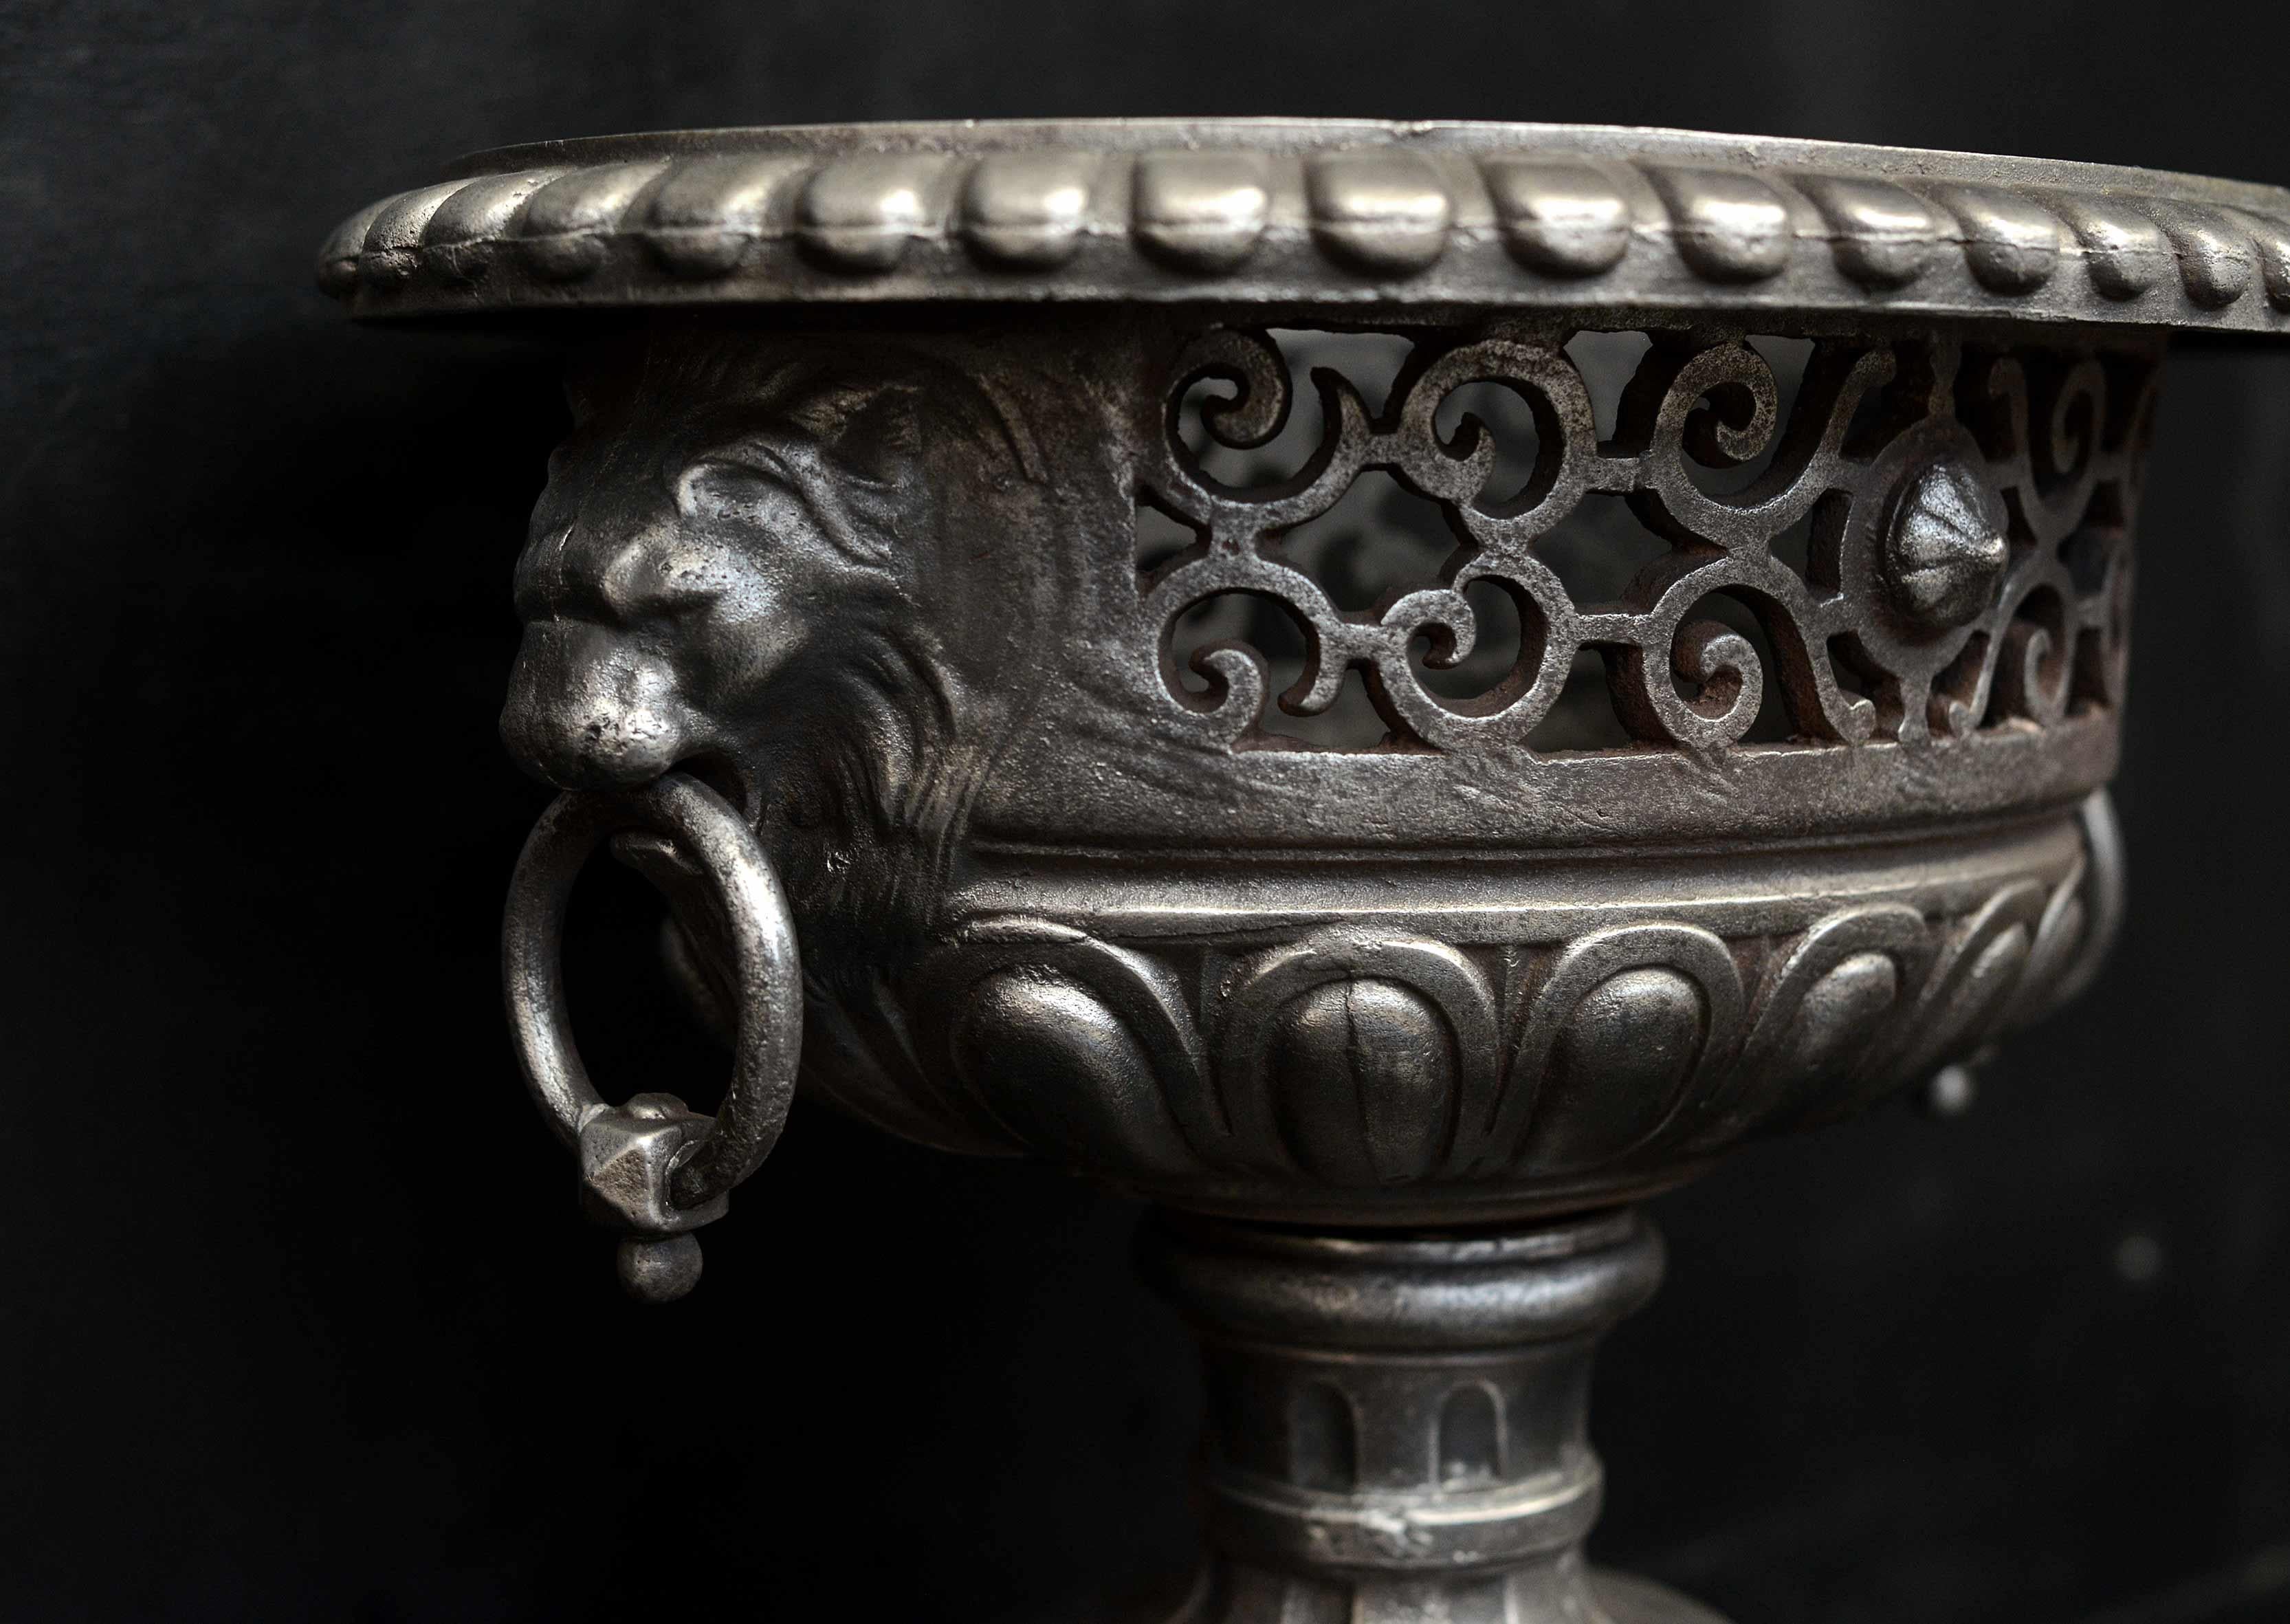 A Regency style urn firegrate in polished cast iron. The gadrooned lower part surmounted by scrollwork and rosette paterae and gadrooned top. The ring handles in lion's masks. Italian Bardiglio marble plinth below. English, 19th